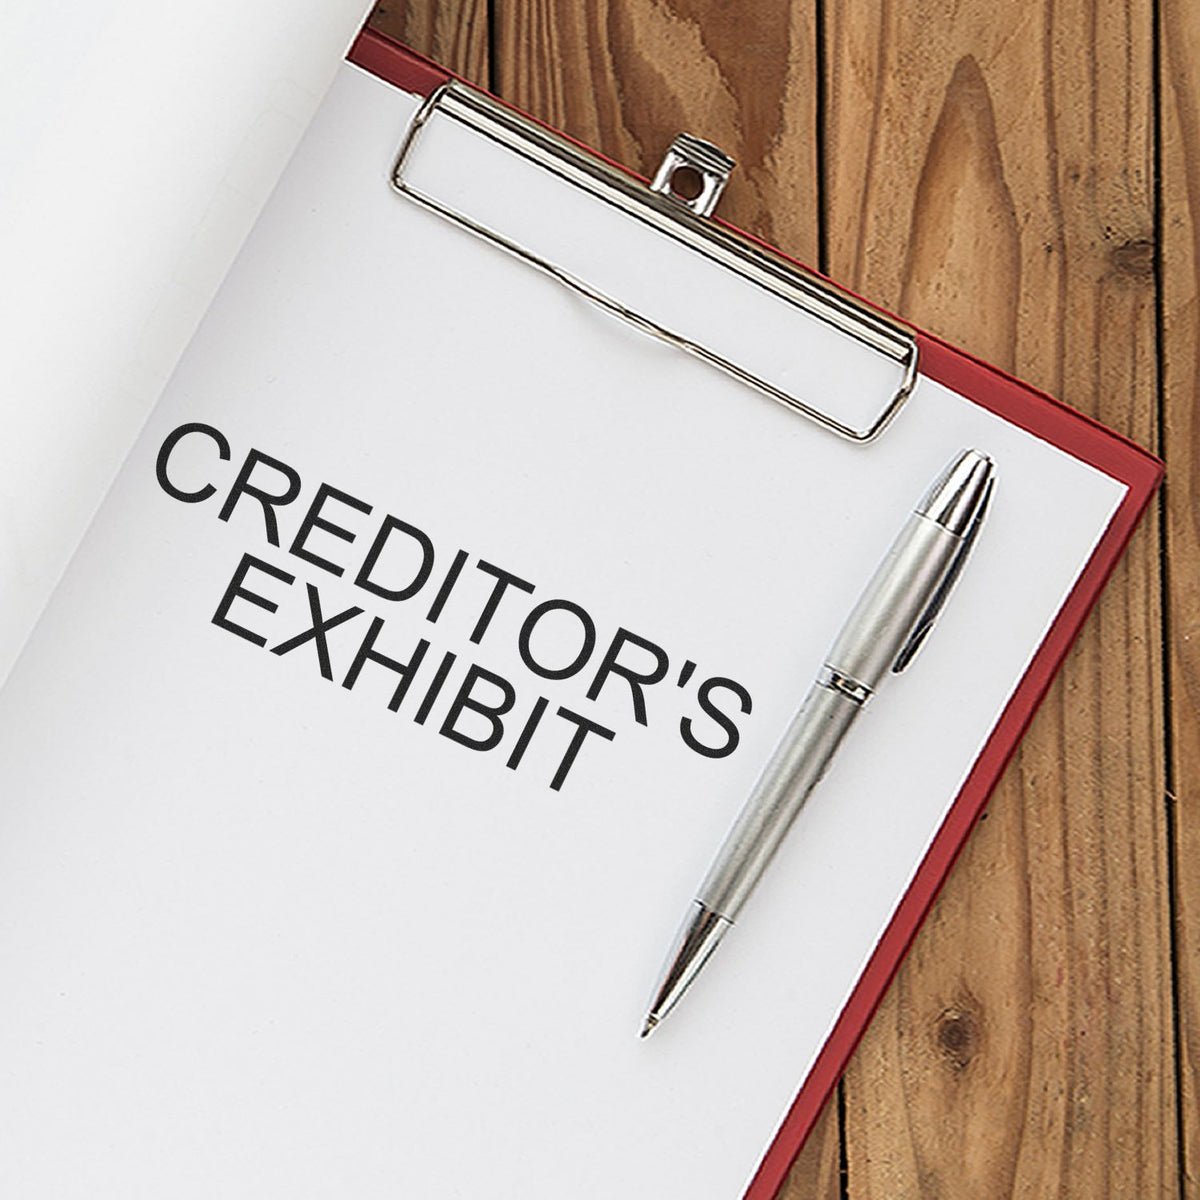 Large Creditors Exhibit Rubber Stamp Lifestyle Photo